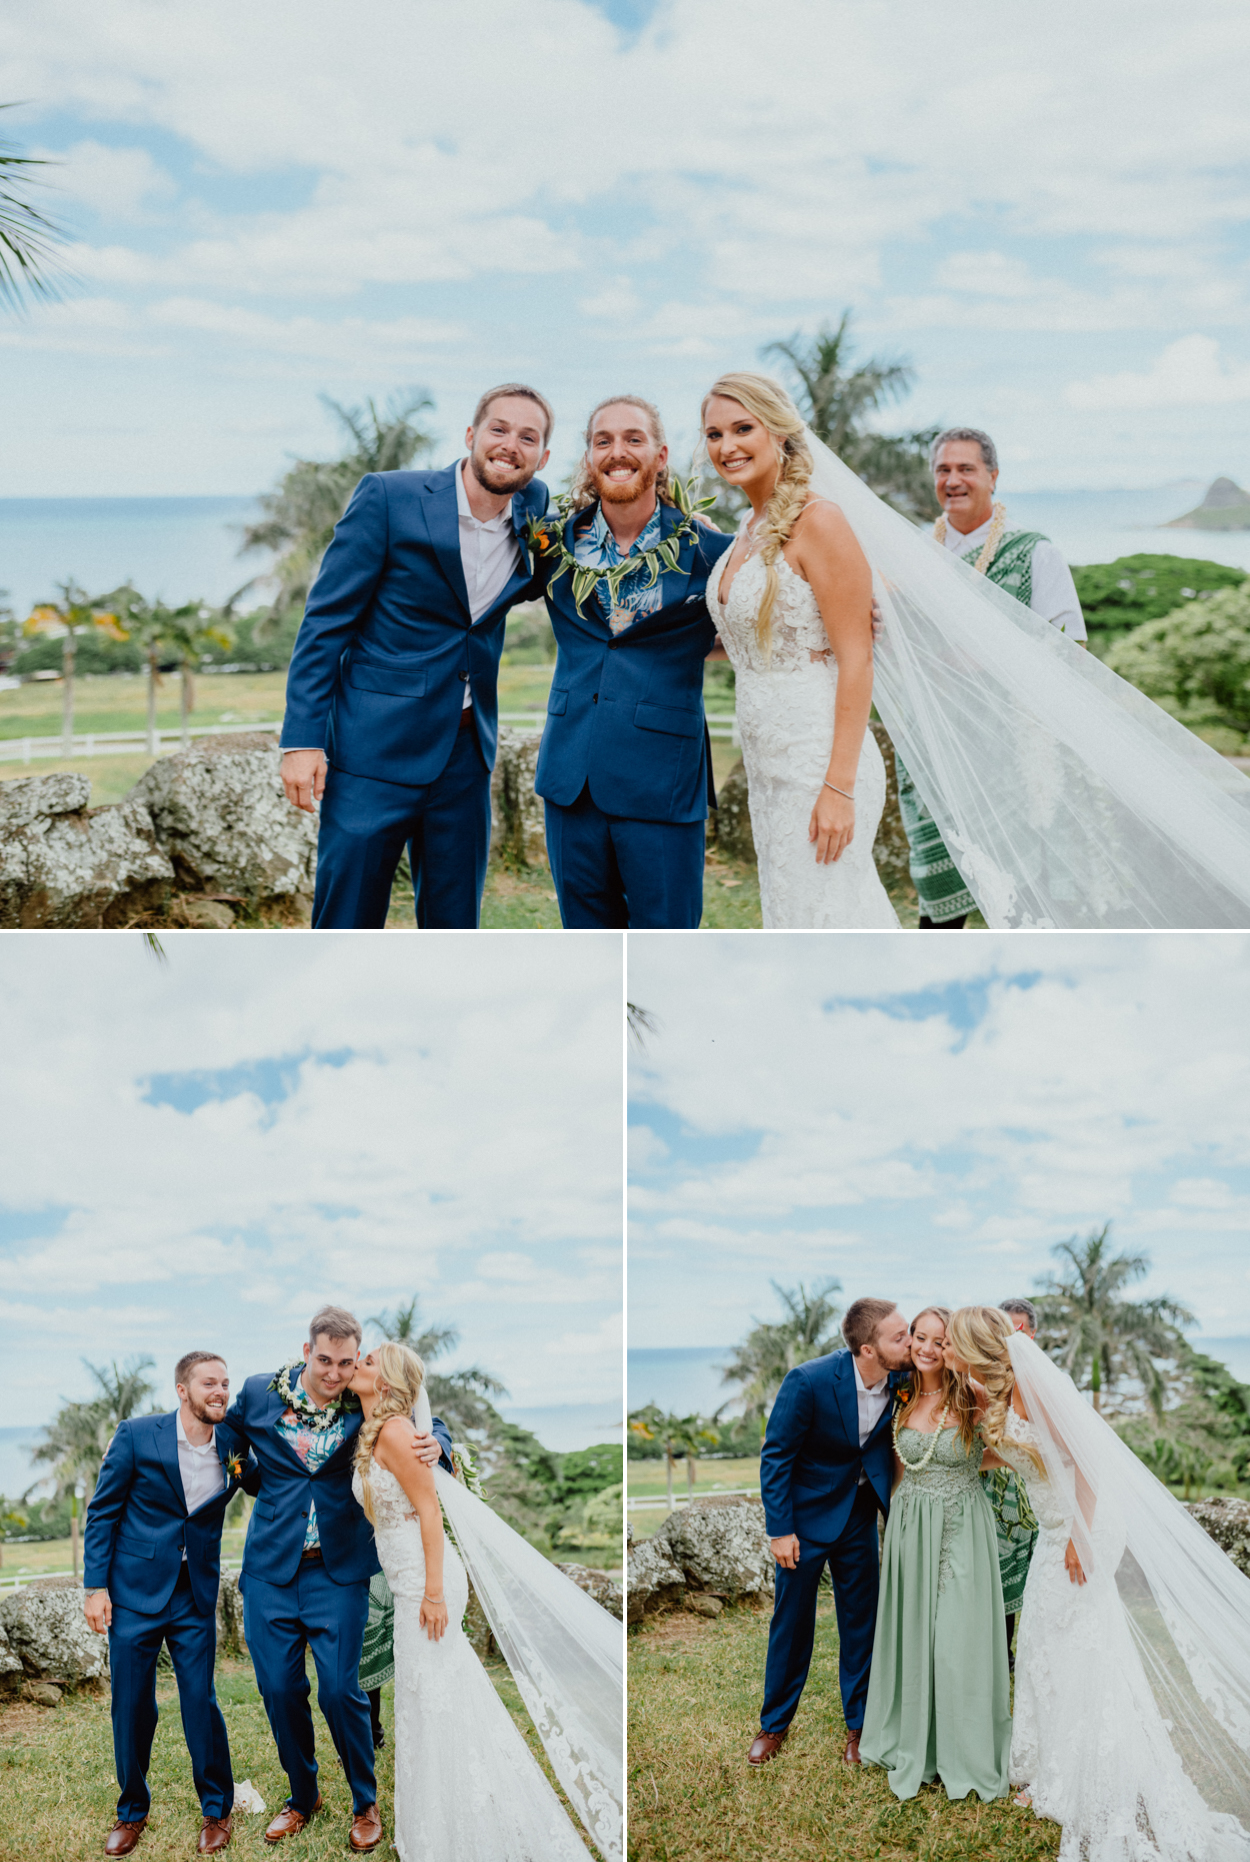 Bride and Groom posing with their brothers and sisters in Paliku Gardens Venue at Kualoa Ranch wedding with Chinaman's hat background